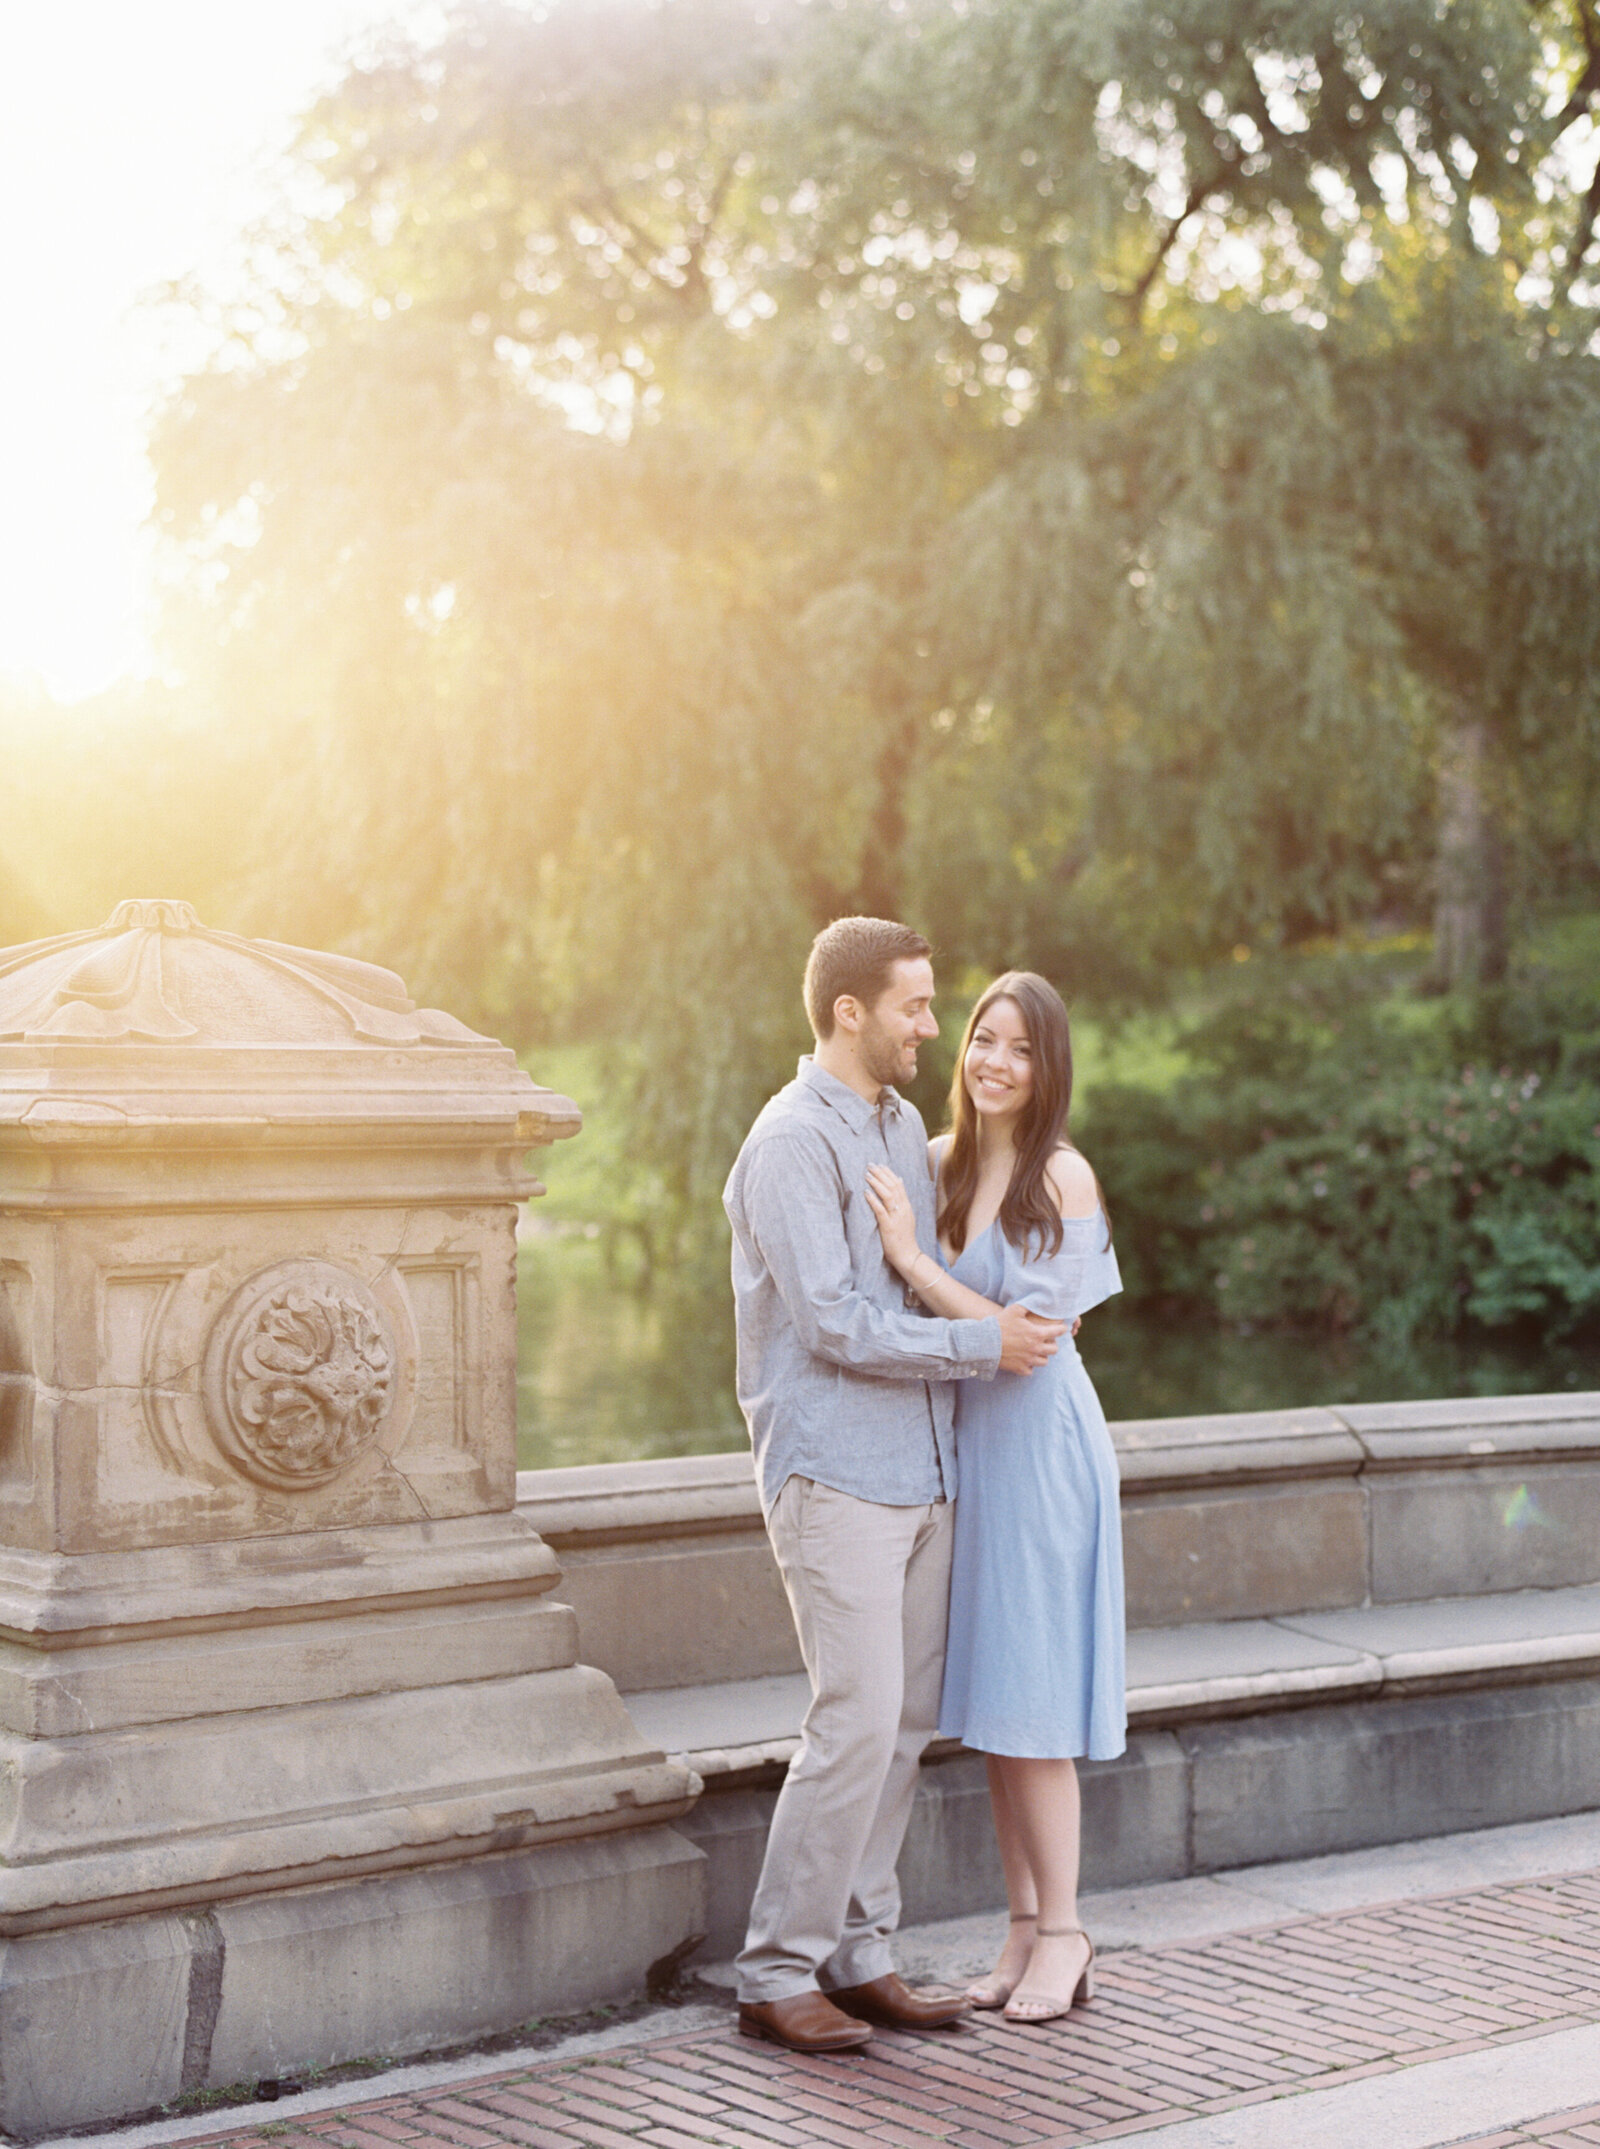 Kaylea Moreno_engagement gallery - Mike-Leia-engagement-session-14